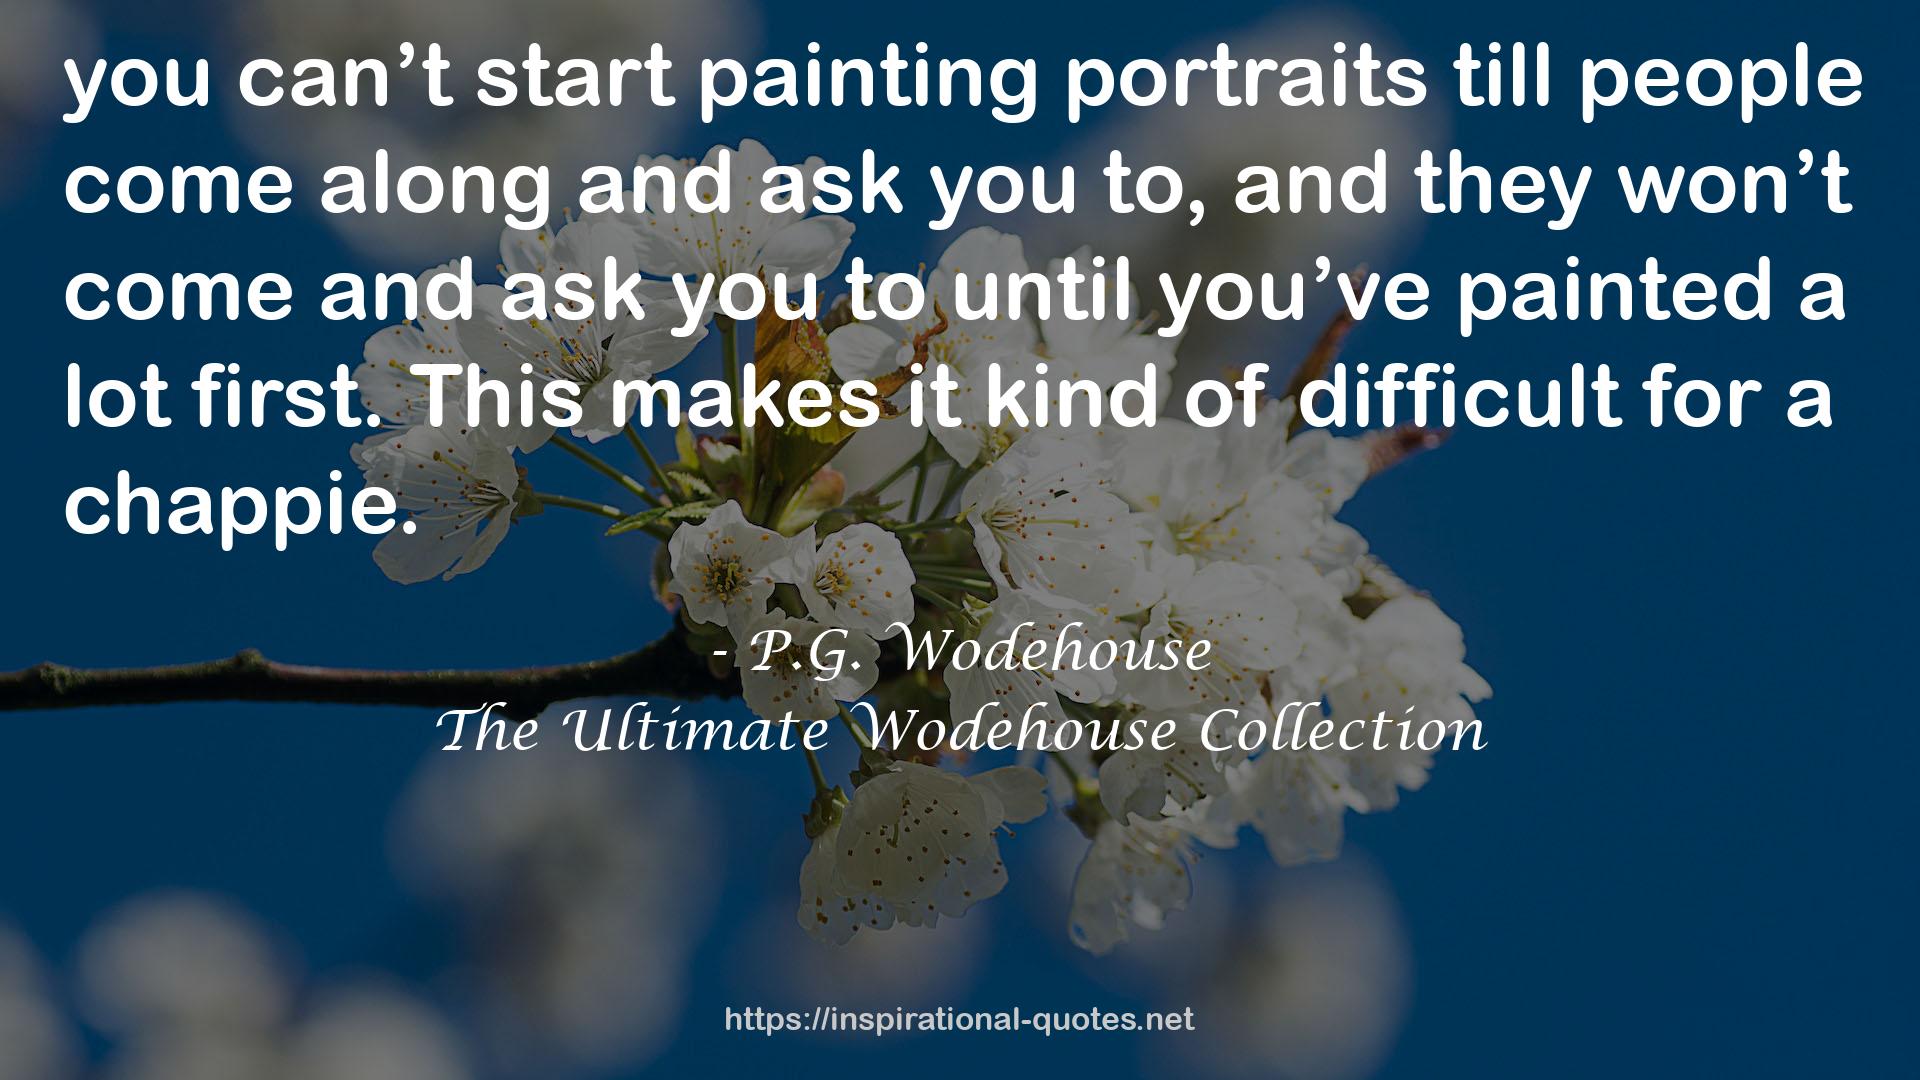 The Ultimate Wodehouse Collection QUOTES